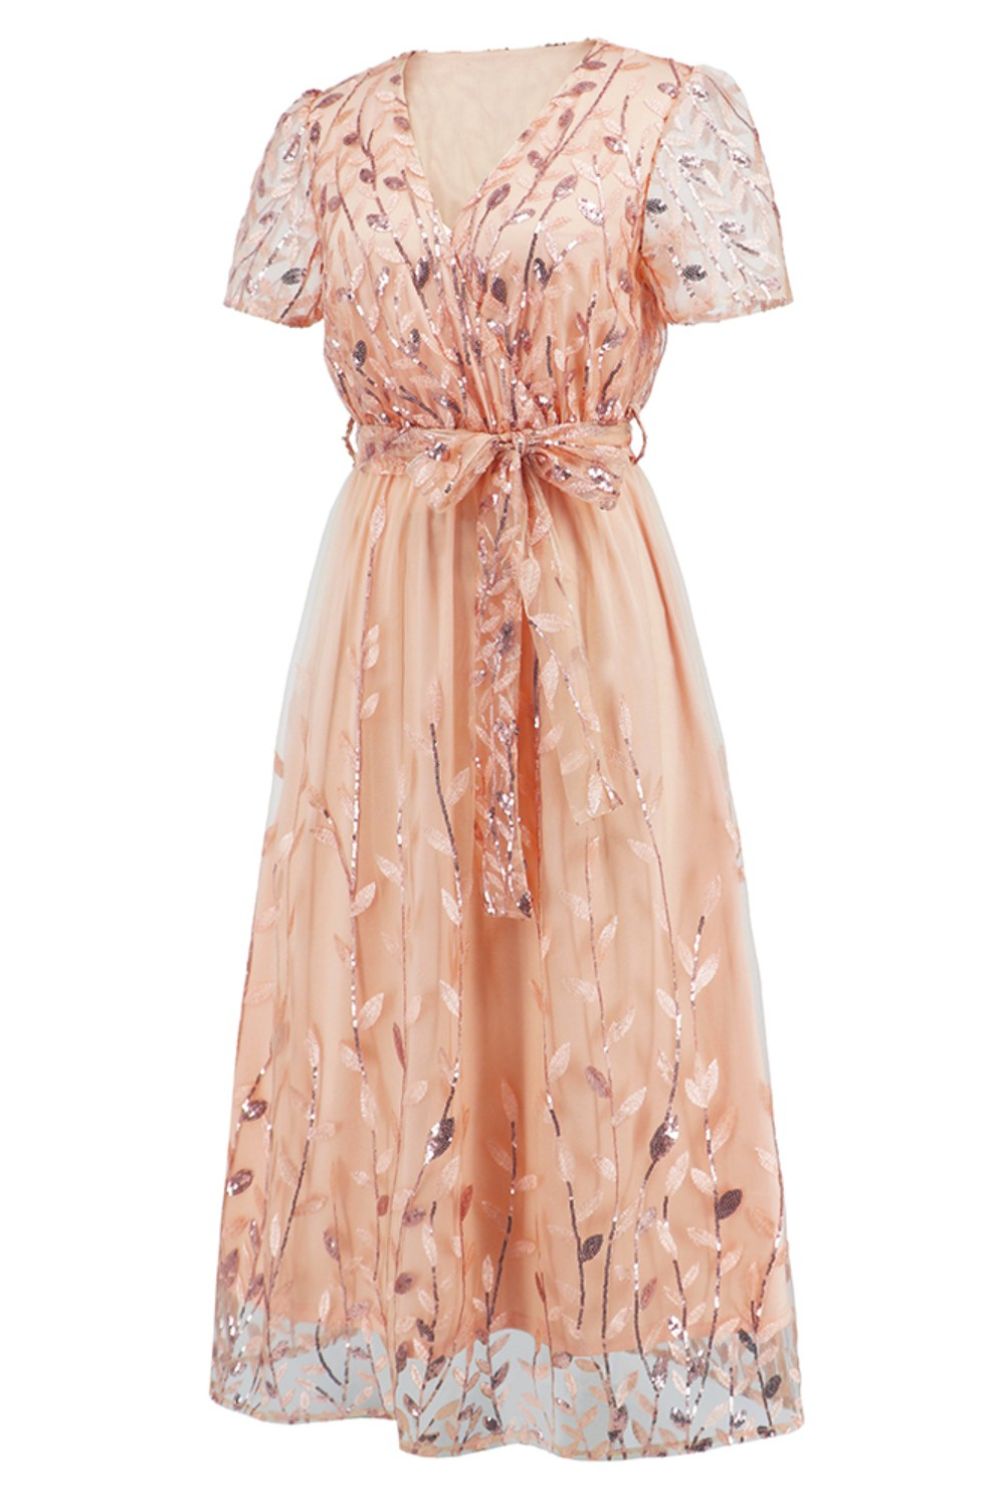 Sequin Leaf Embroidery Tie Front Short Sleeve Dress